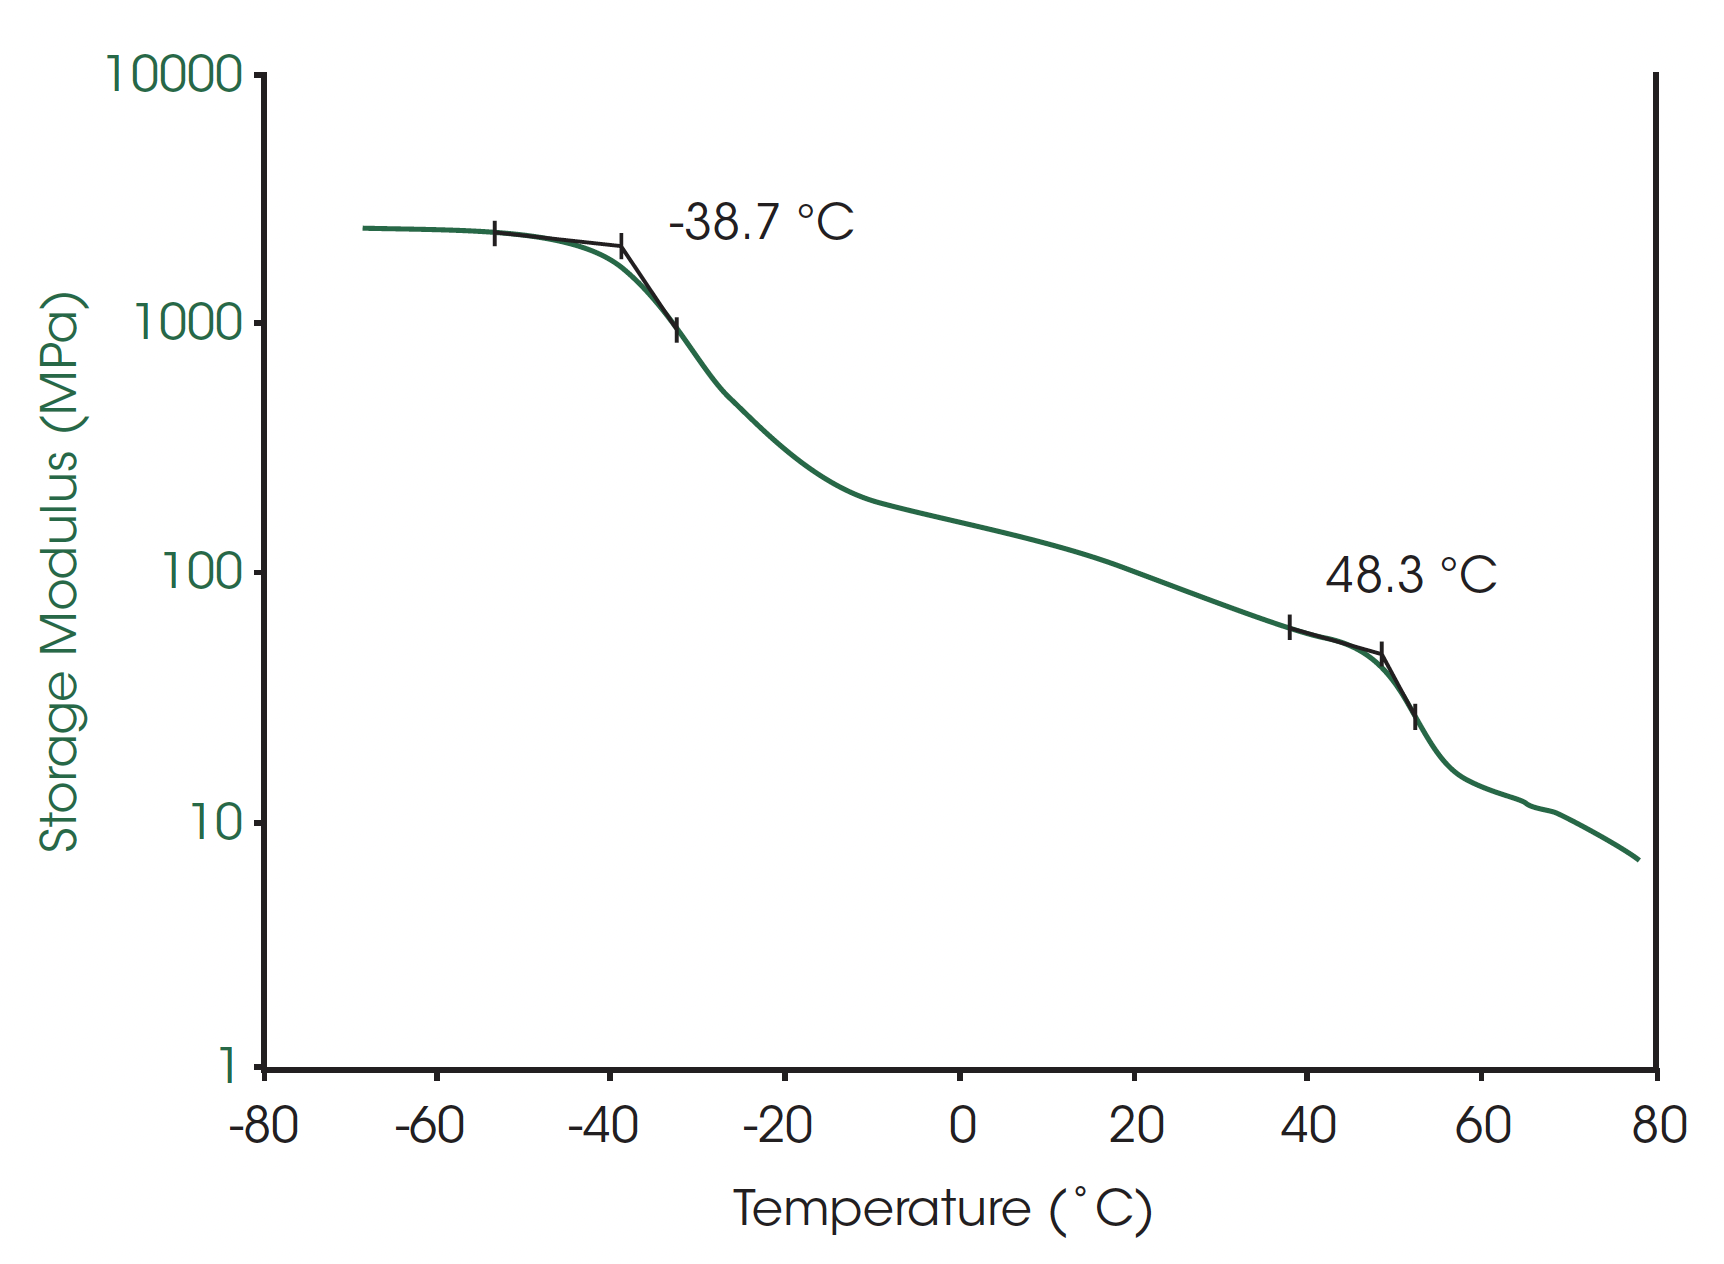 Figure 5. DMA Dynamic temperature tamp test. The test was performed at temperature from -70°C to 80°C at a ramp rate of 3°C/ min and frequency of 1Hz.